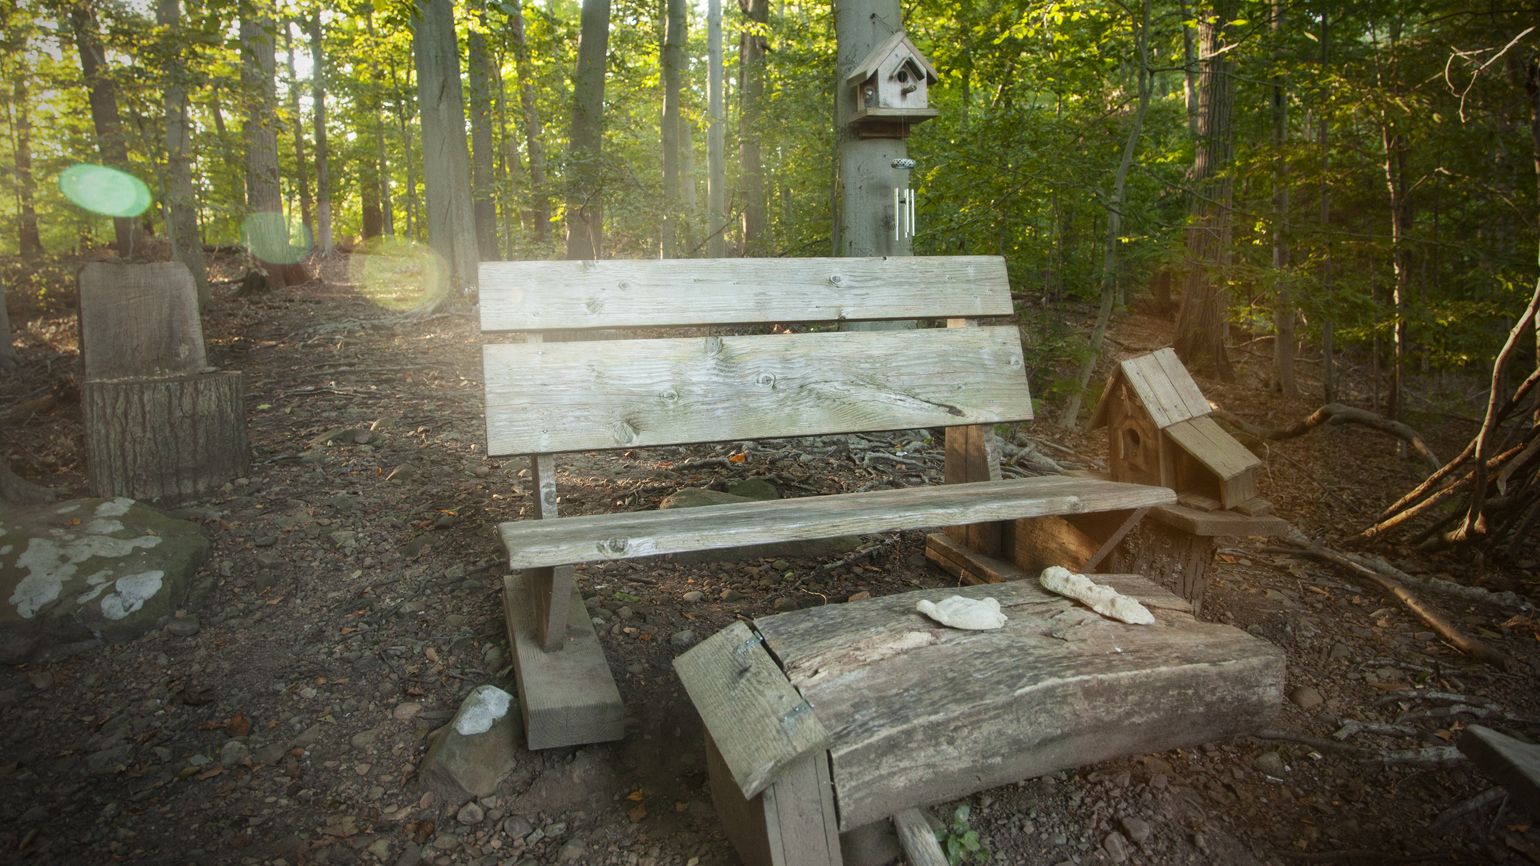 The Bench at Mabel’s Bluff in Short Hills, NJ.